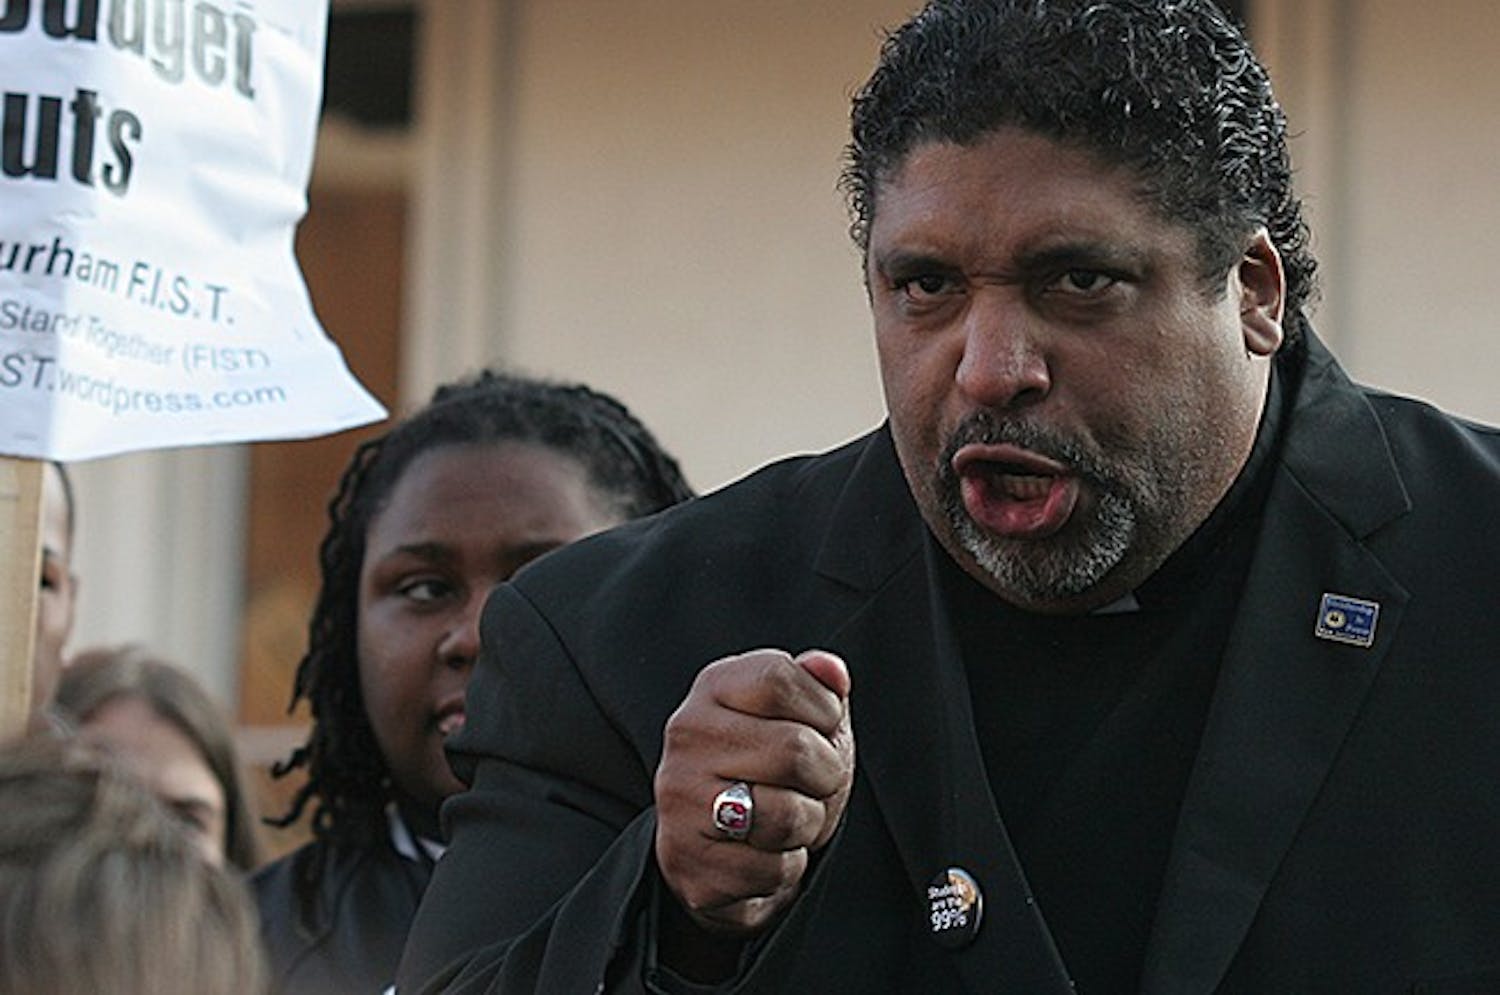 Rev. Dr. William J. Barber II, president of the North Carolina chapter of the NAACP, speaks to students of the BOG protest Friday morning.

"You are the student movement of this generation."

"Forward together, not one step back!"

"We will not be divided, nor defeated.  We are the generation that refuses to go backwards."
